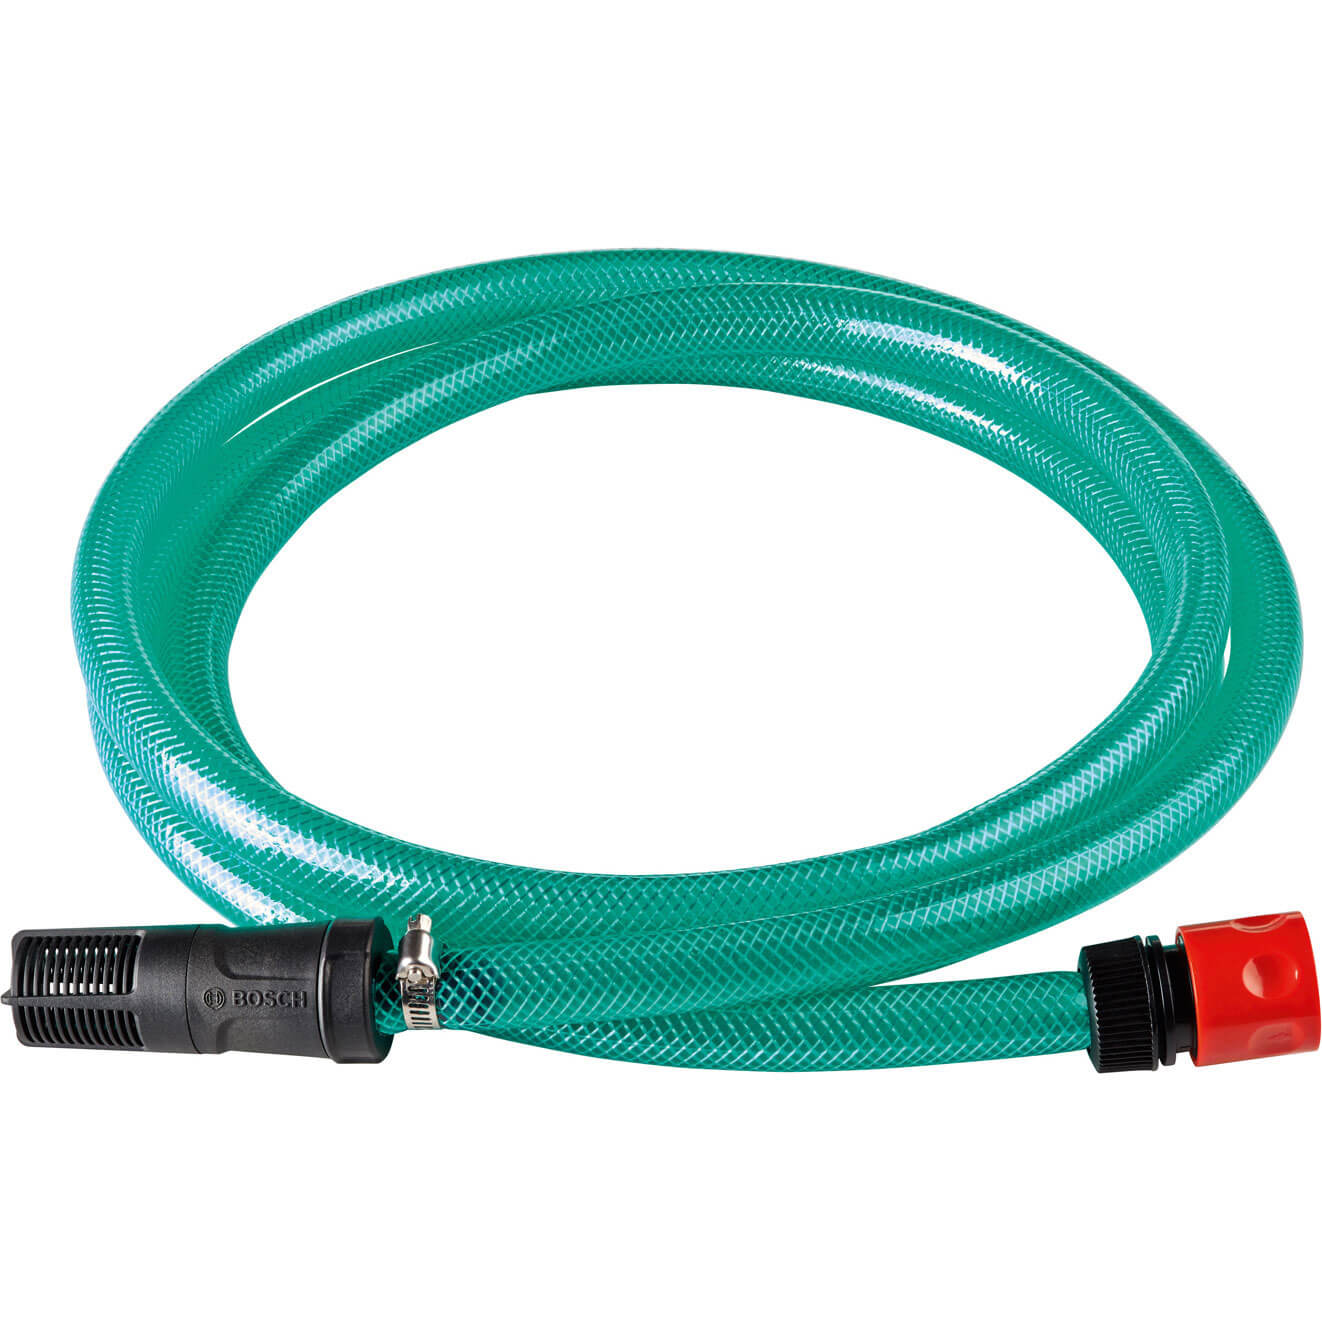 Bosch Self Priming Suction Hose and Filter for AQT Pressure Washers 3m